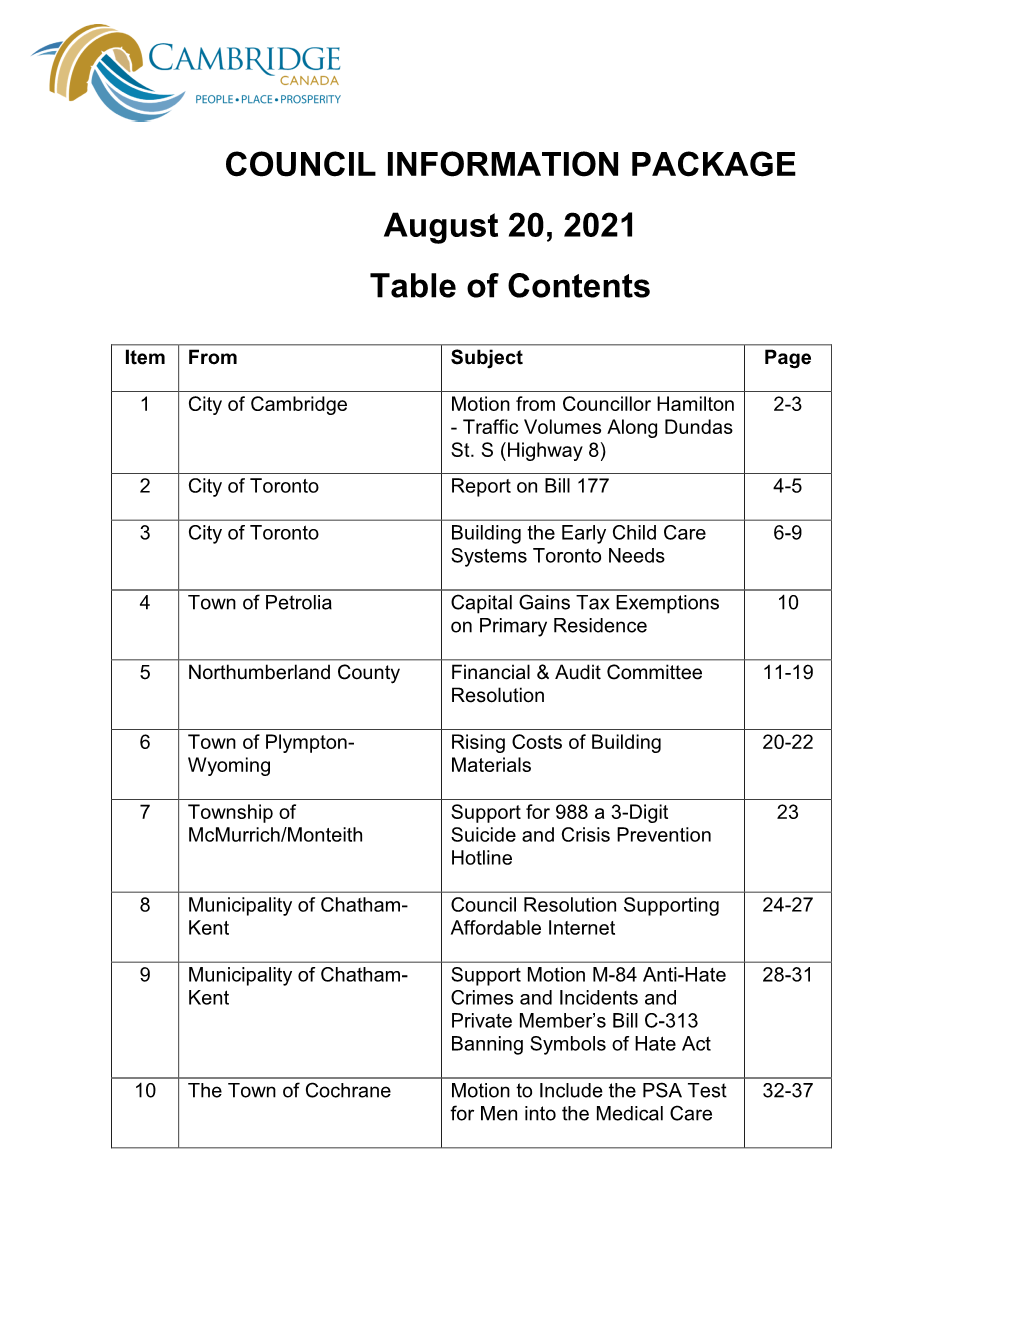 COUNCIL INFORMATION PACKAGE August 20, 2021 Table of Contents